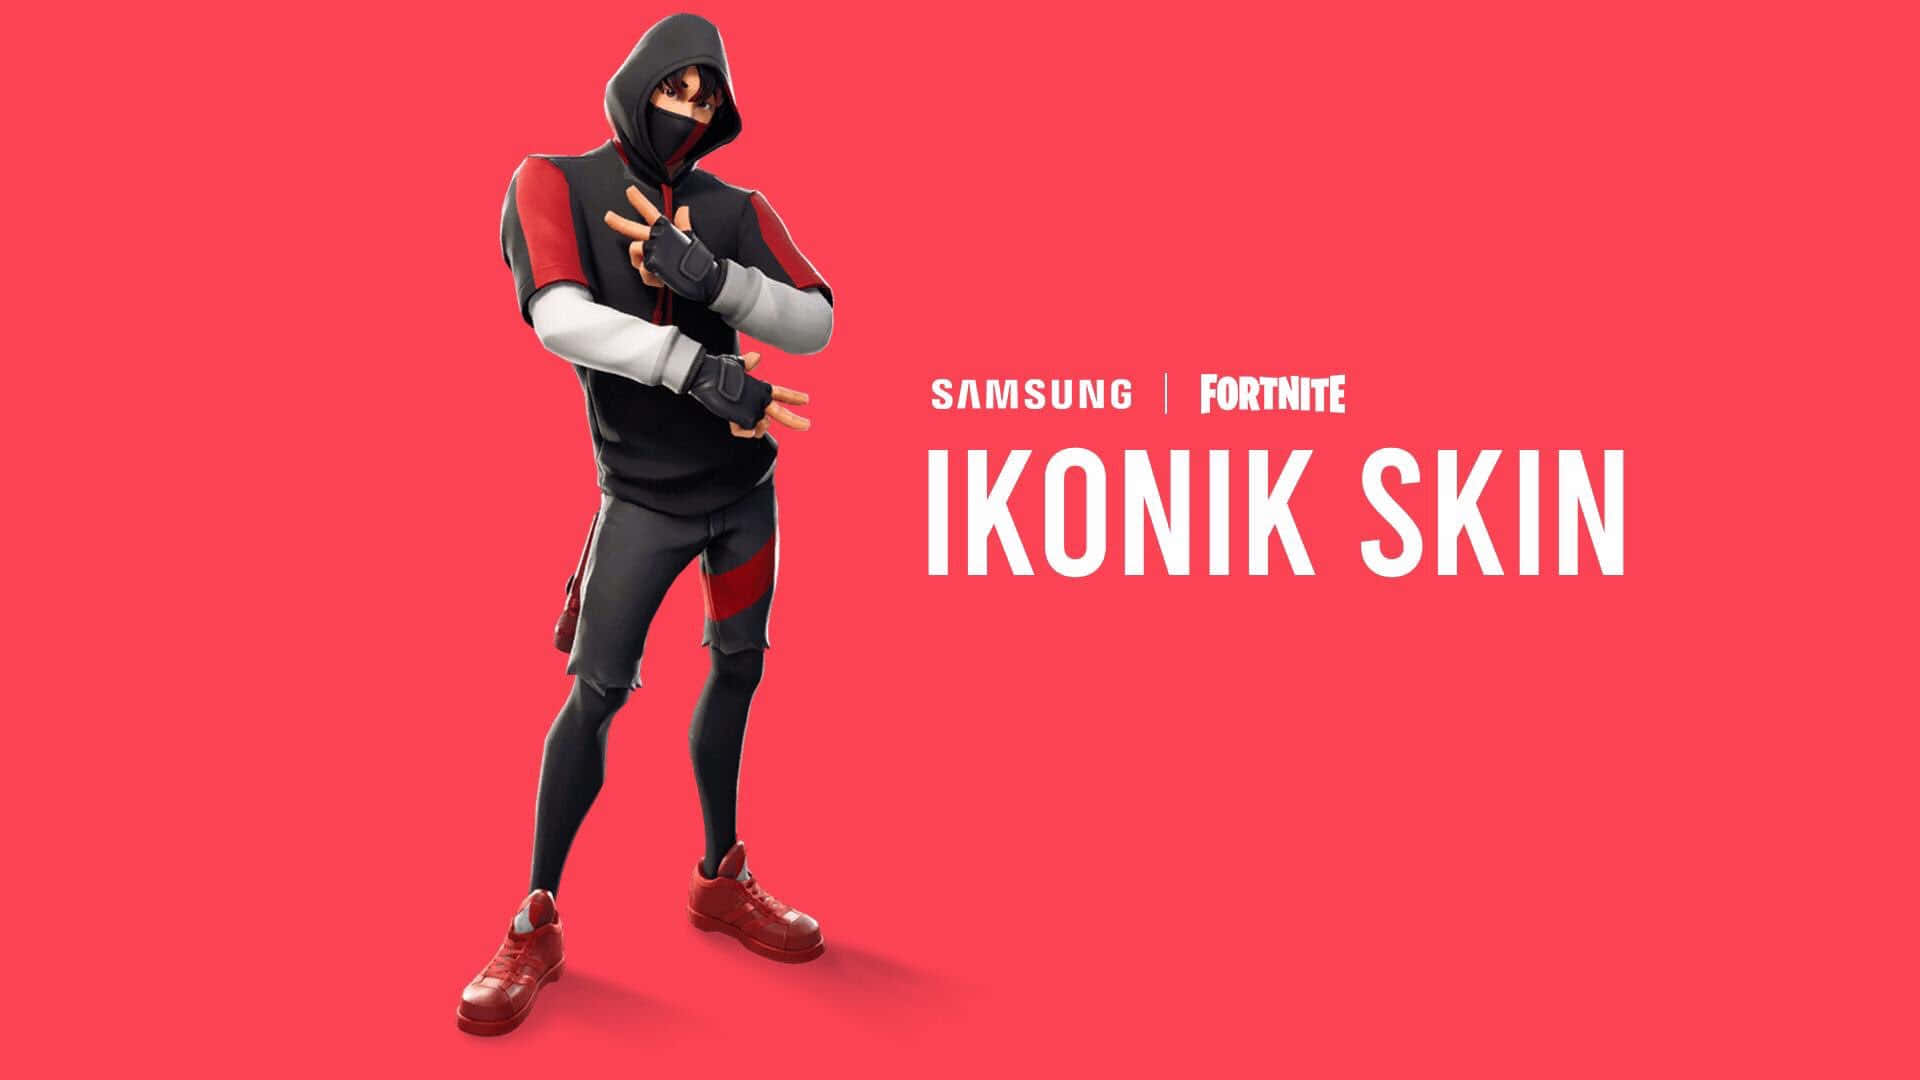 Get ready to play in style with the Fortnite Ikonik Skin. Wallpaper